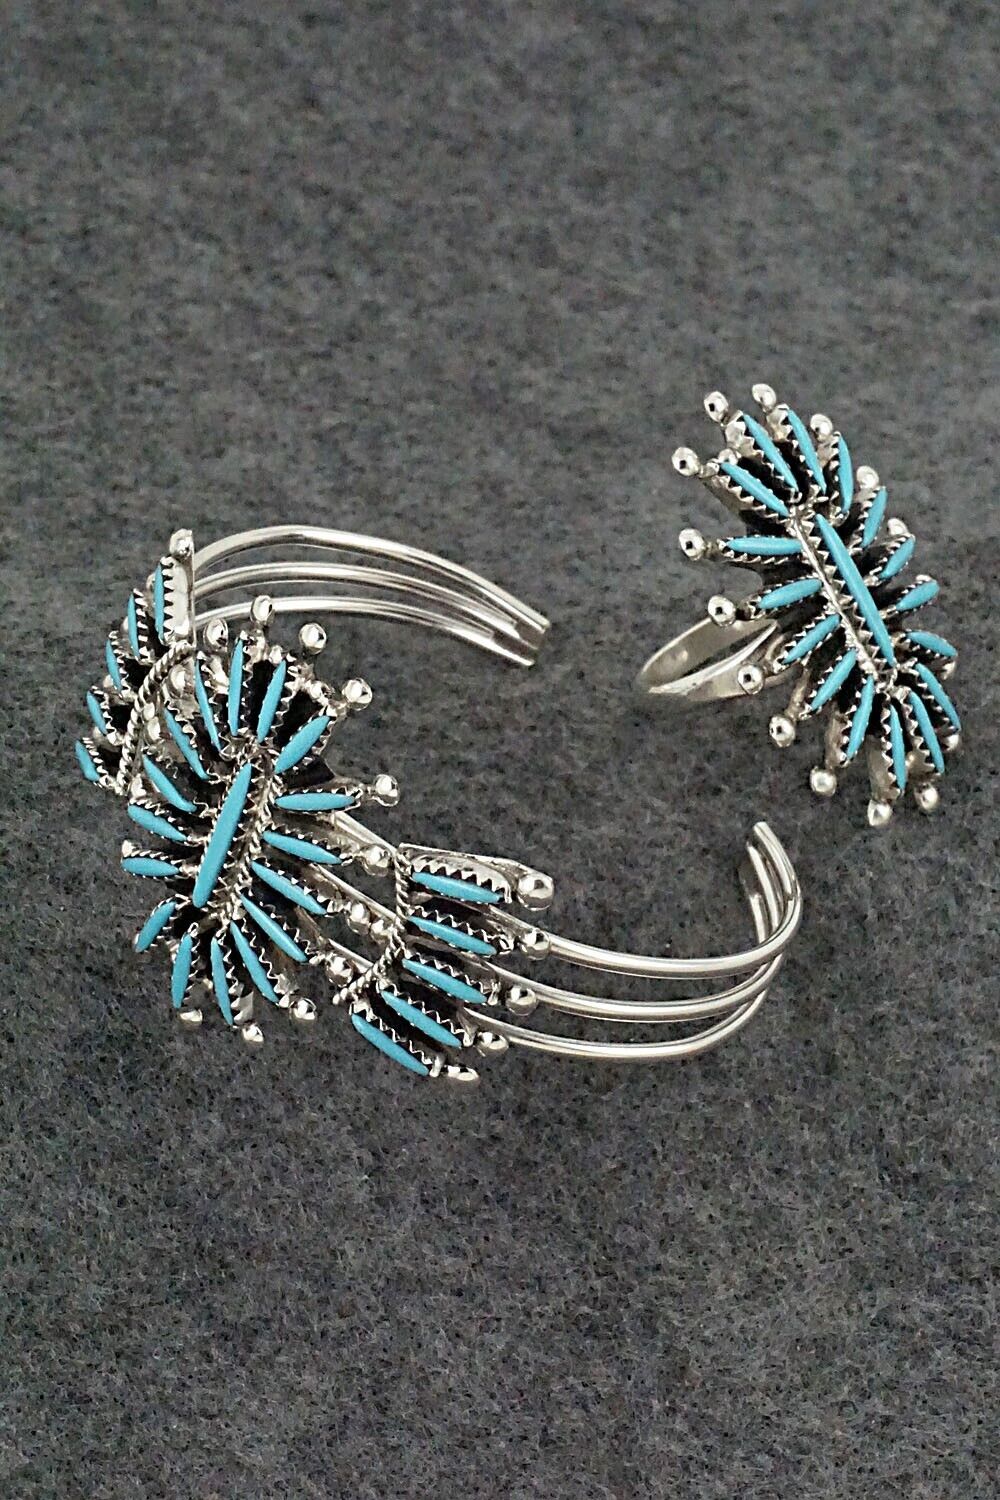 Turquoise & Sterling Silver Bracelet and Ring - Jack Etsate